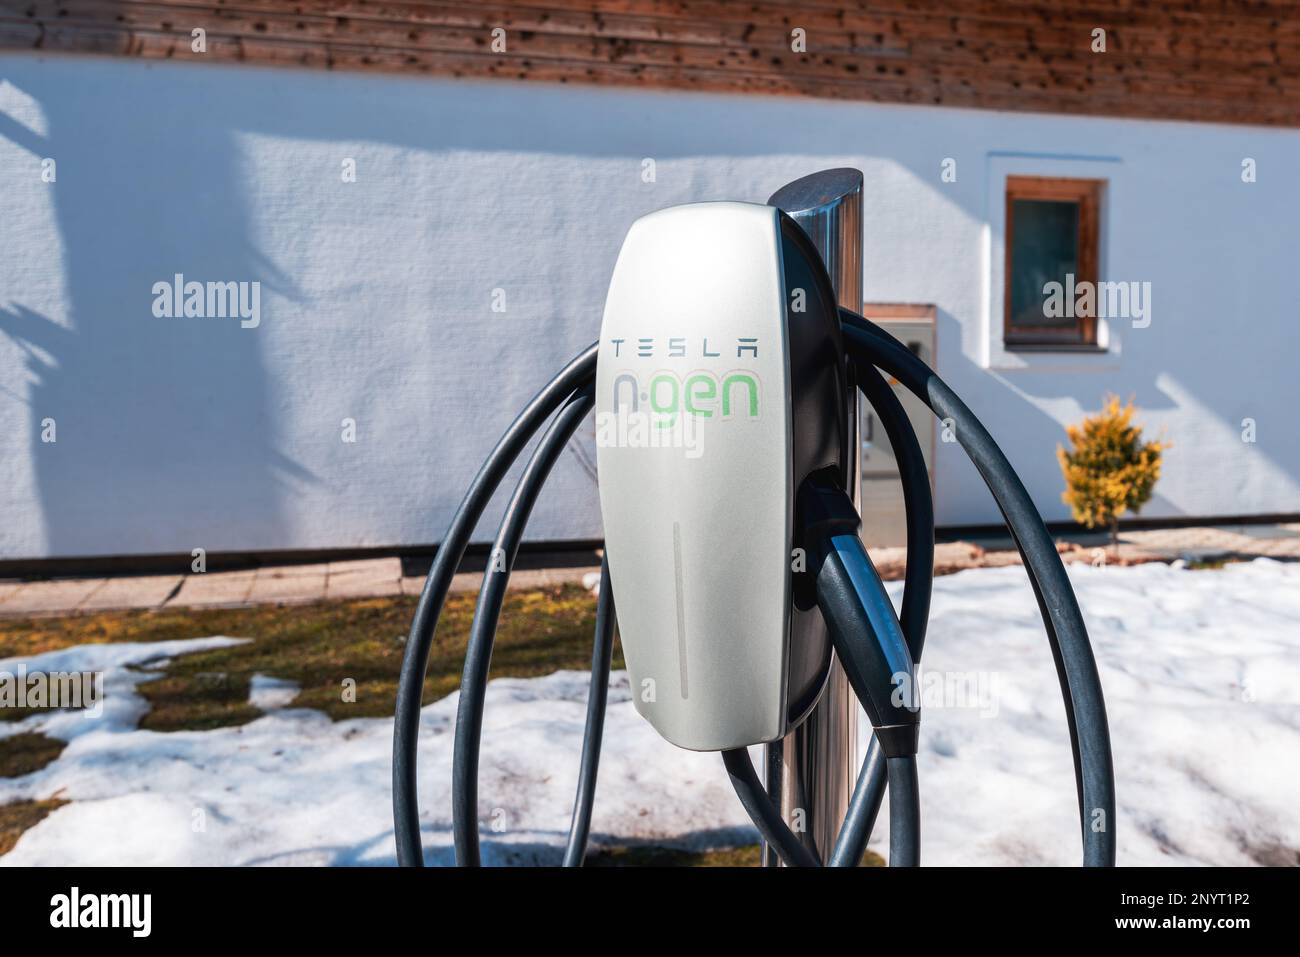 Stara Fuzina, Slovenia - February 21, 2023: Tesla n-gen electric car home charger in house front yard, illustrative editorial Stock Photo